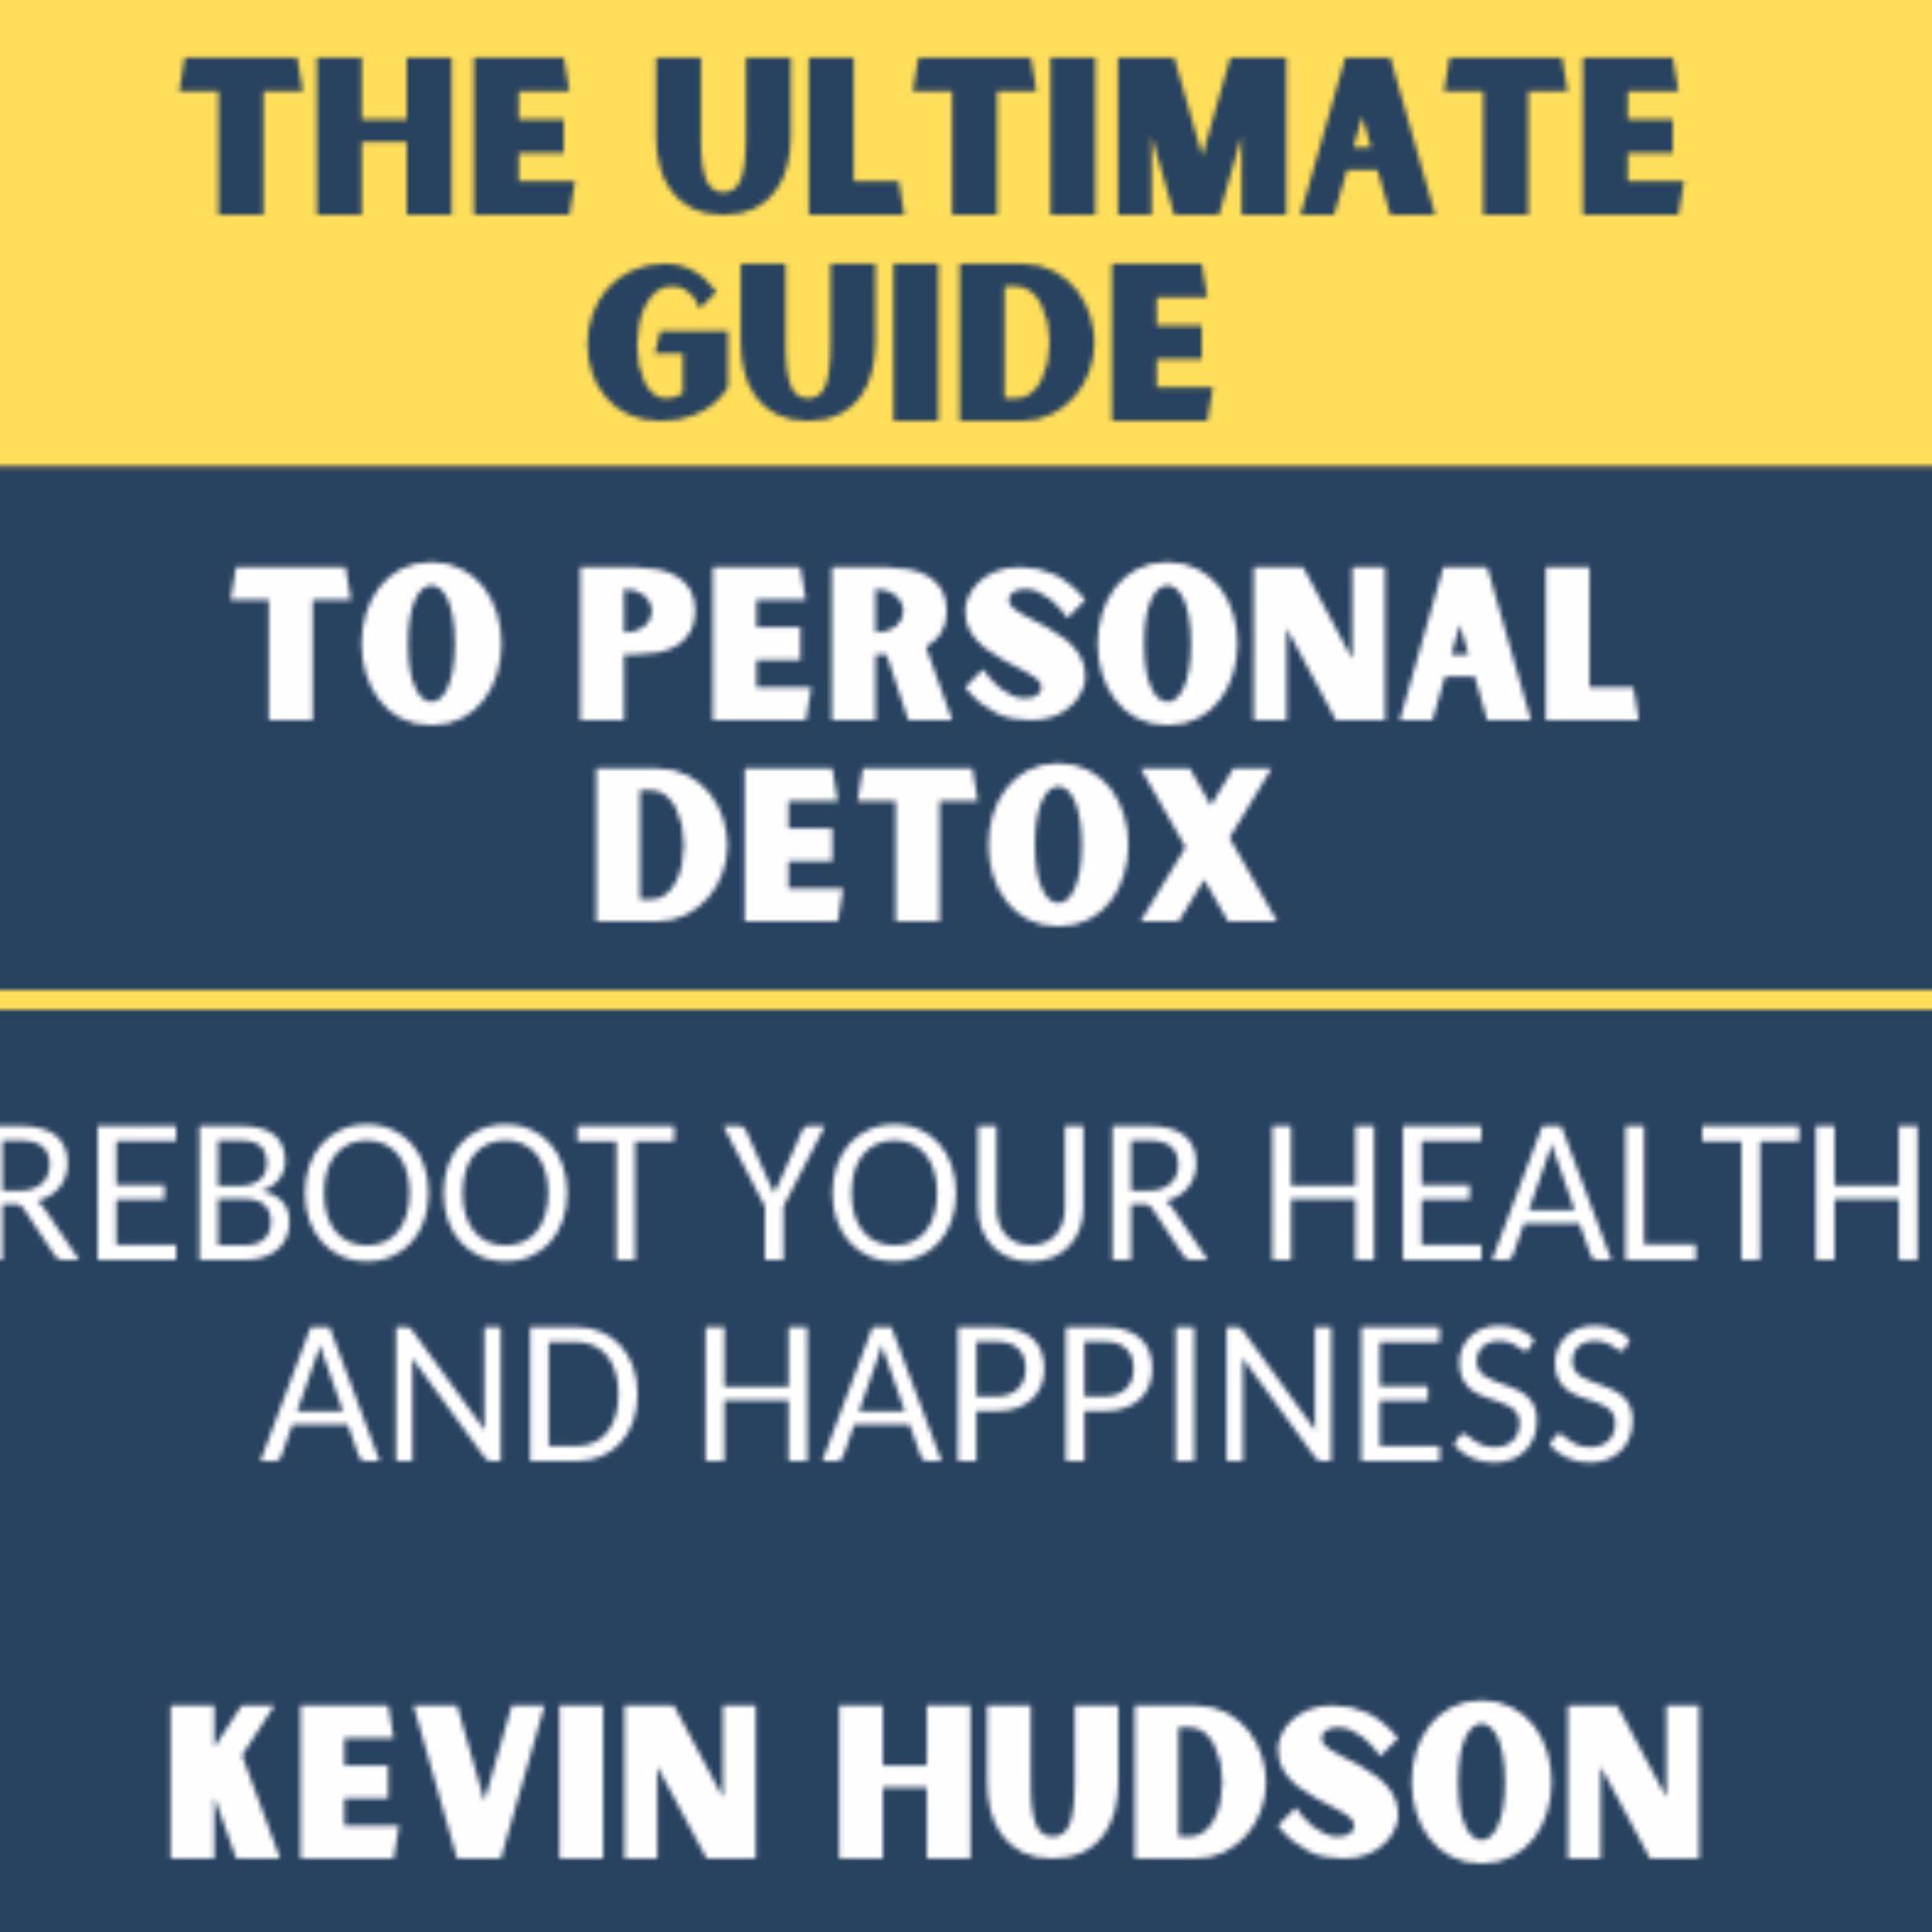 The Ultimate Guide To Personal Detox